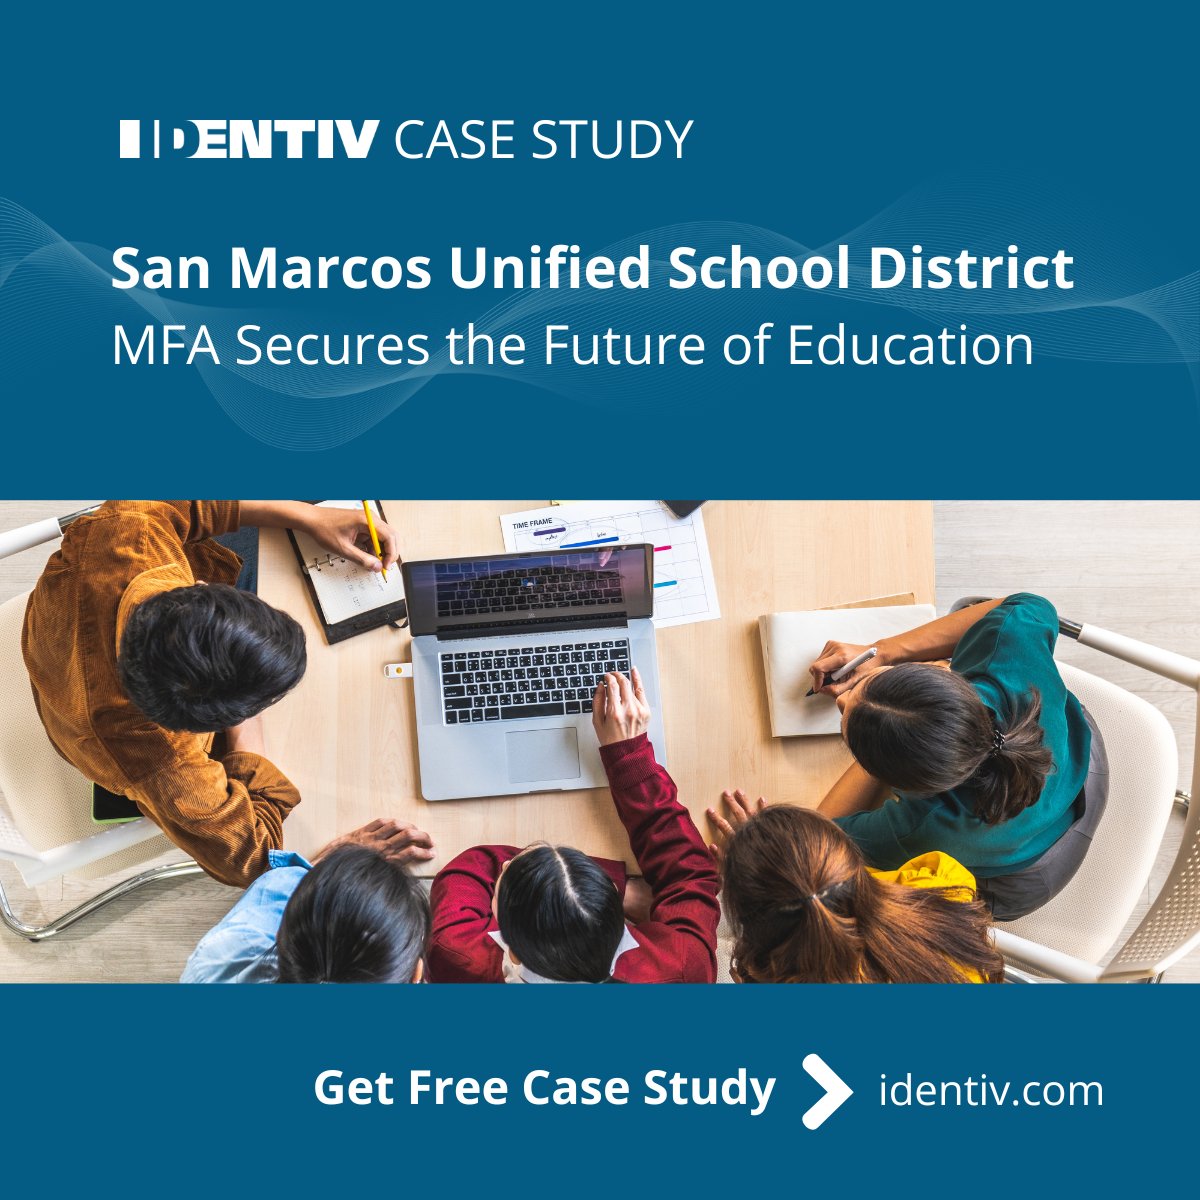 Step up your school’s security game! ✨🏫

Read how San Marcos Unified School District enhanced their #cybersecurity with just one simple change.

Get the full scoop in our latest case study 👉 ow.ly/vRig50Ry8gm

#IdentivSecurity #SafeSchools #SchoolSecurity